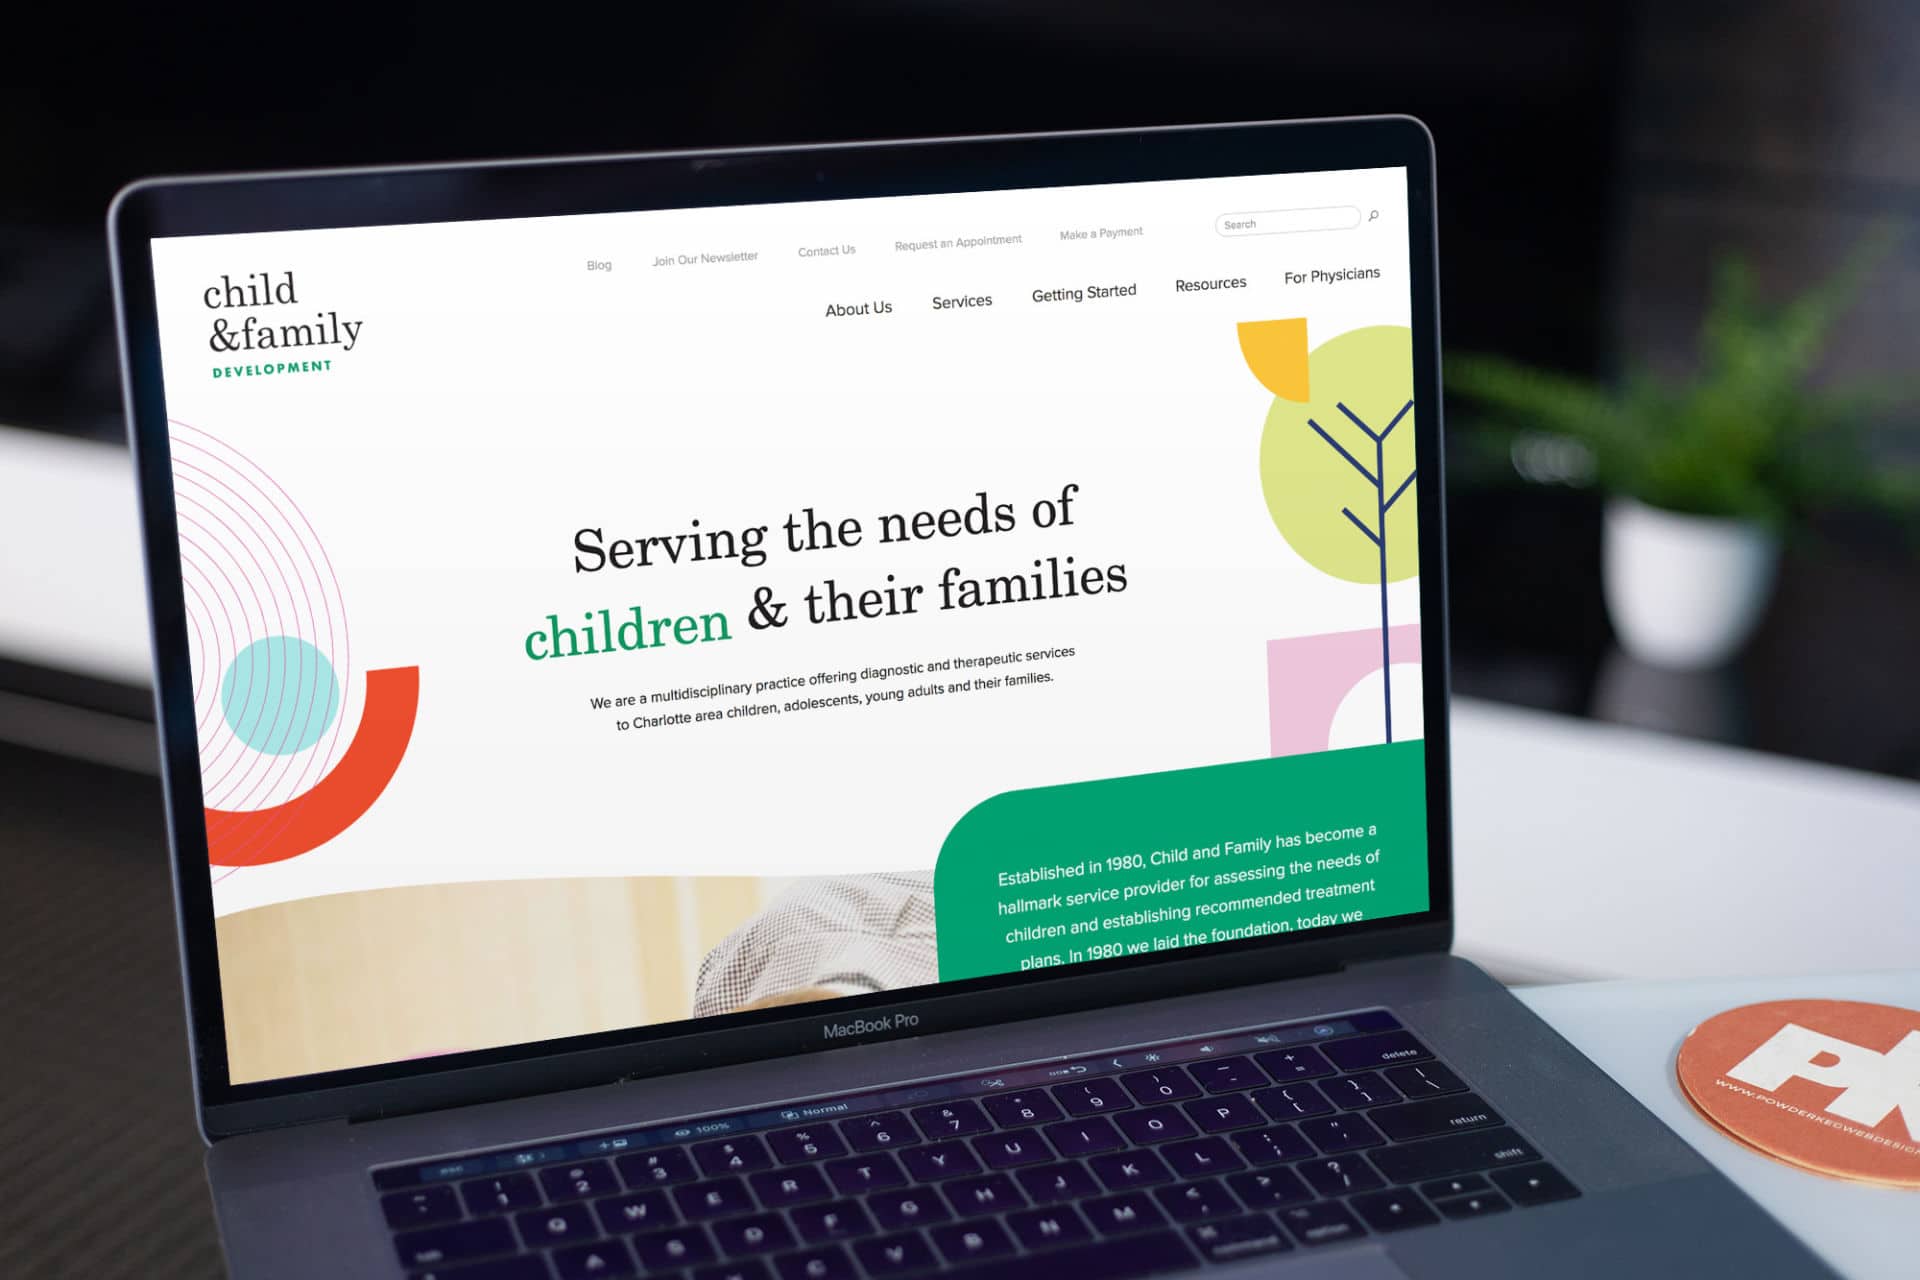 Image of the Child & Family Development website on a laptop.